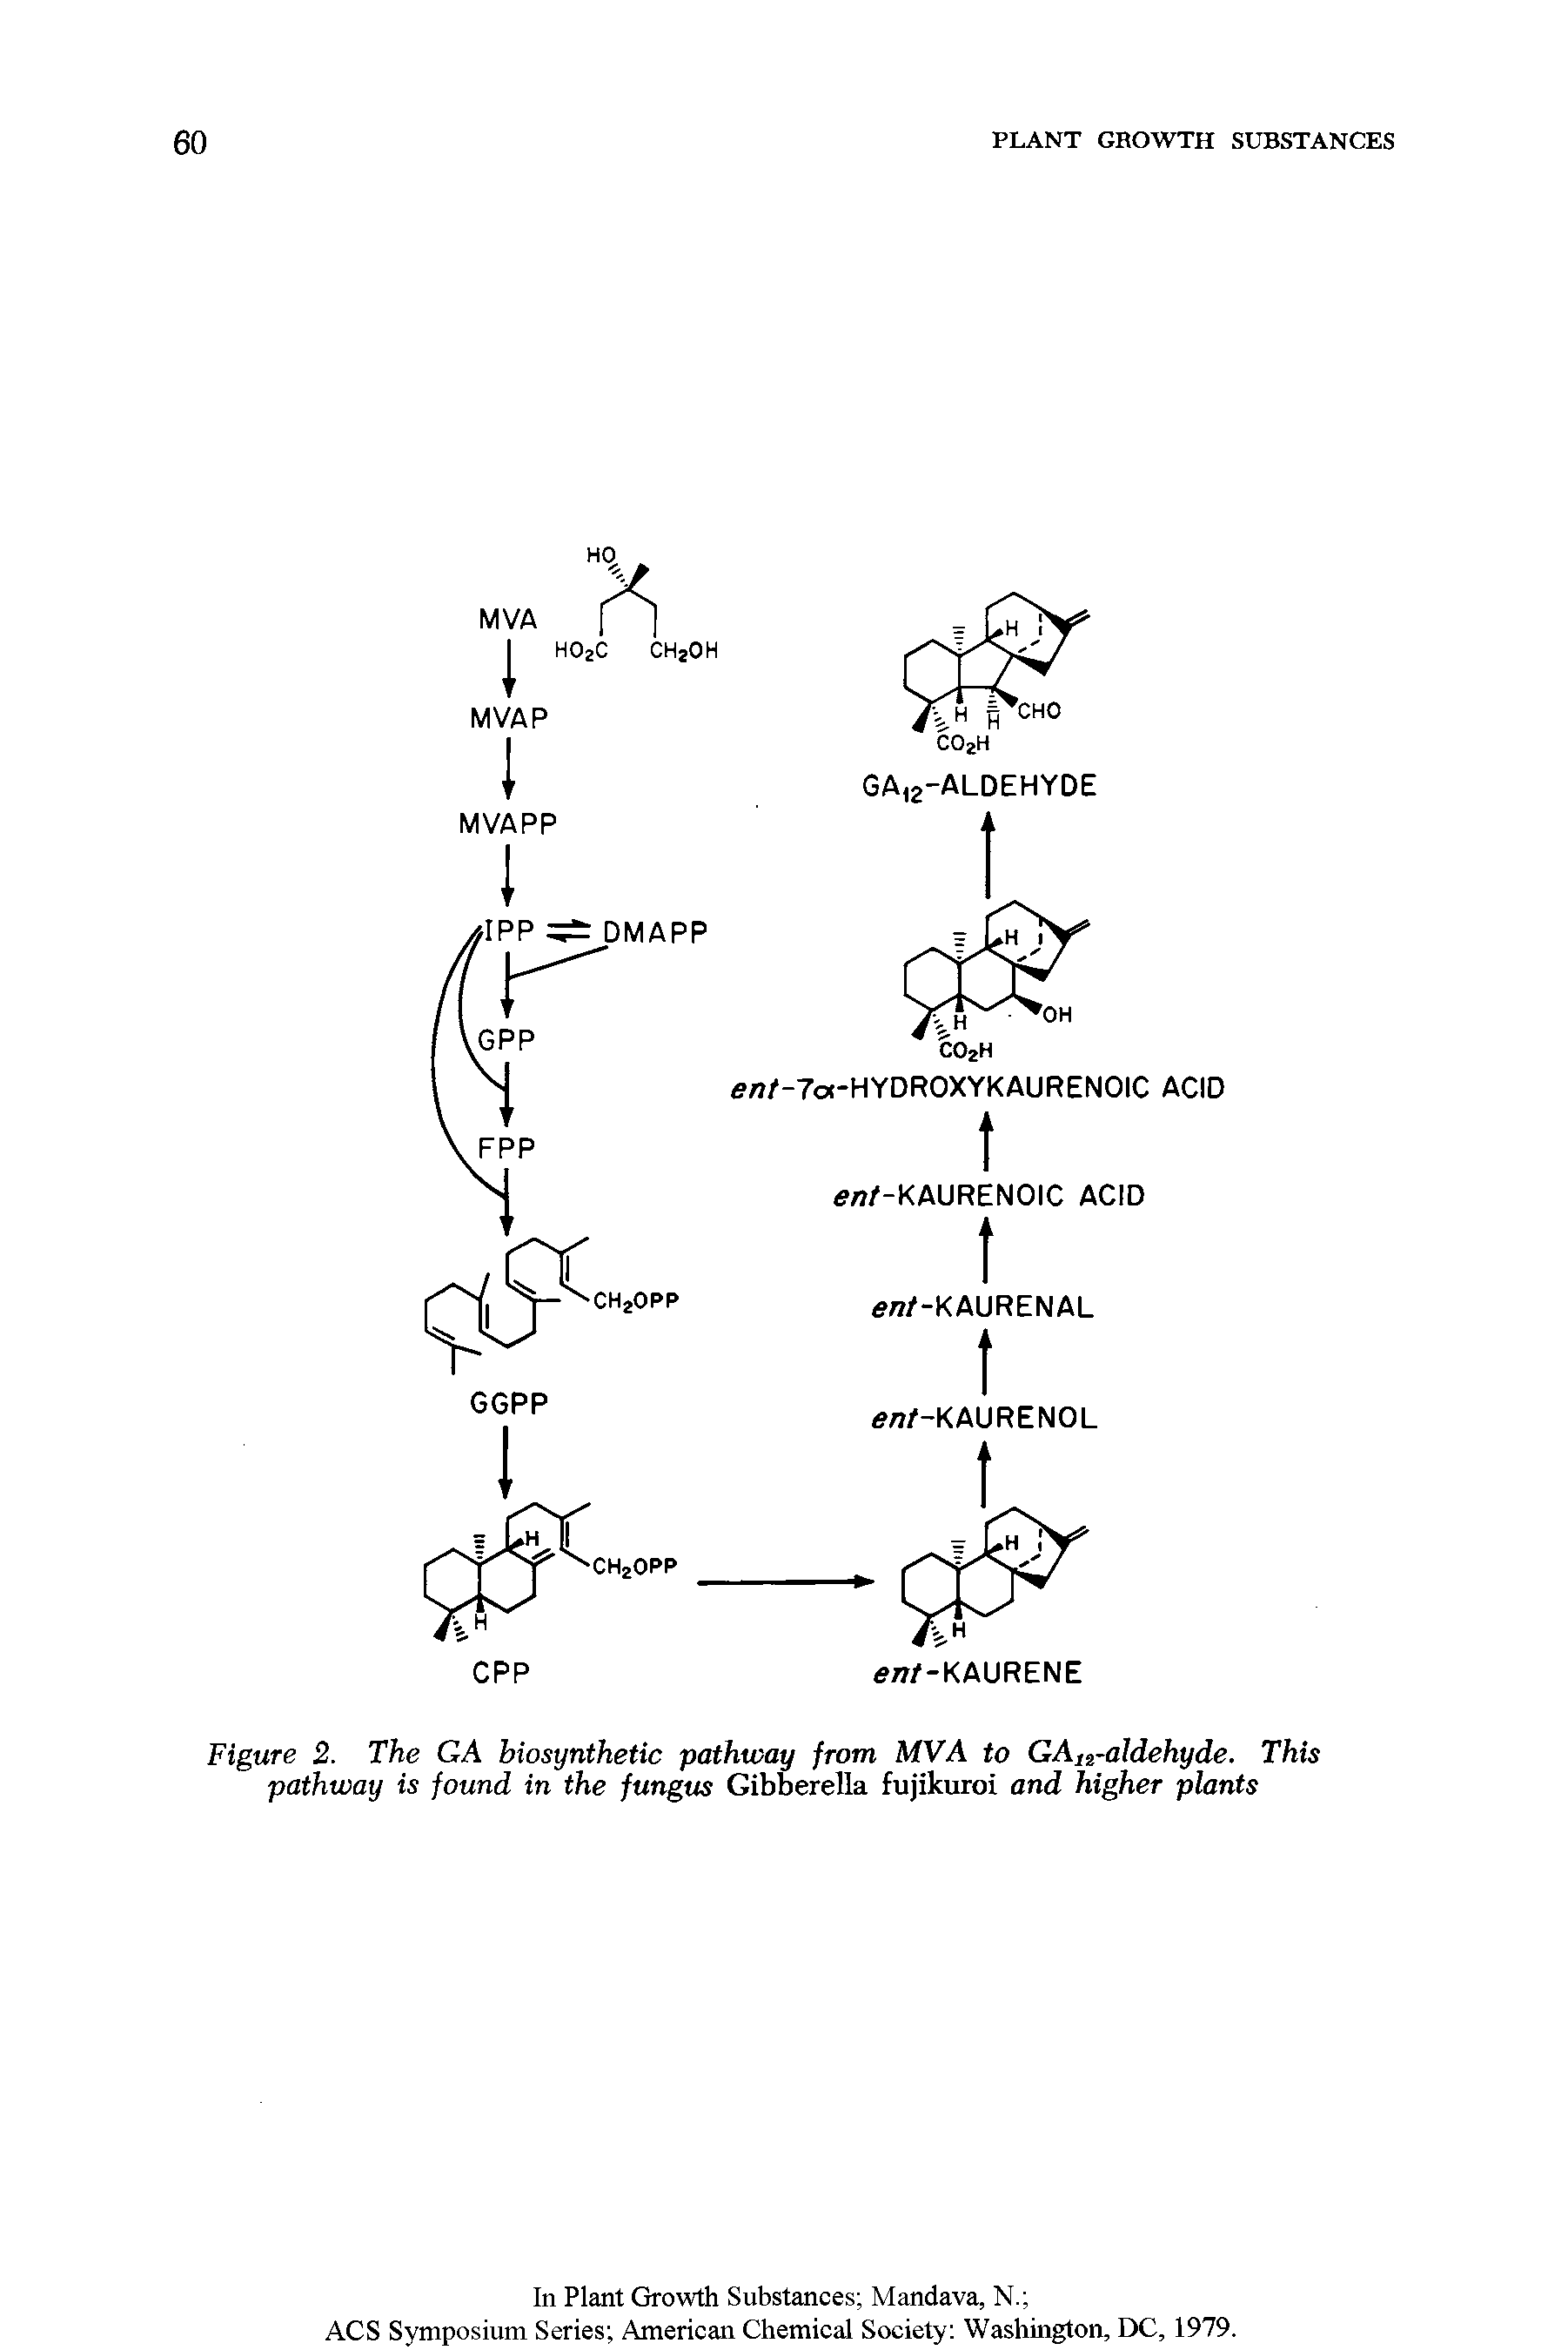 Figure 2. The GA biosynthetic pathway from, MVA to GAlsraldehyde. This pathway is found in the fungus Gibberella fujikuroi and higher plants...